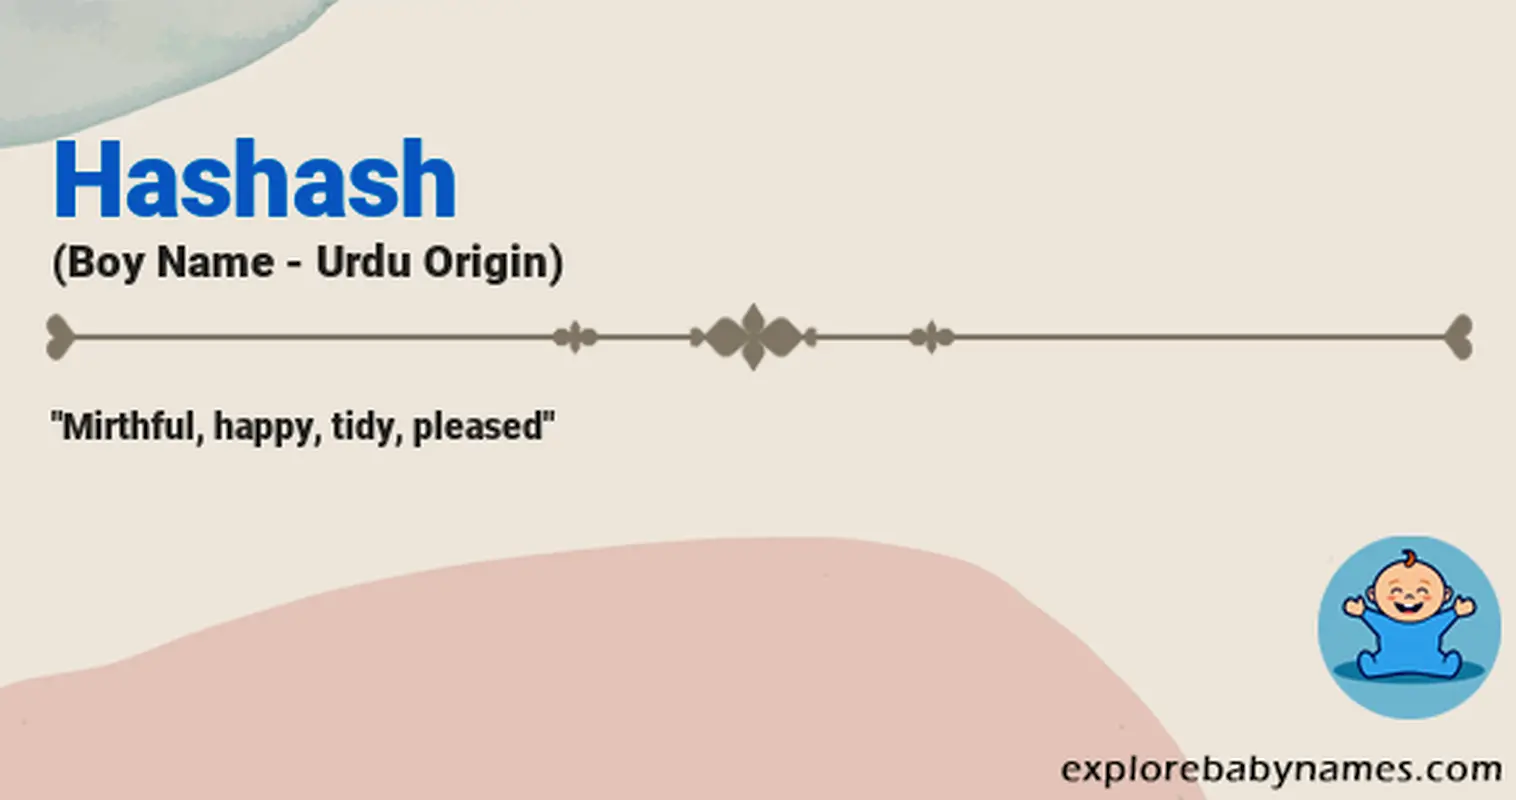 Meaning of Hashash